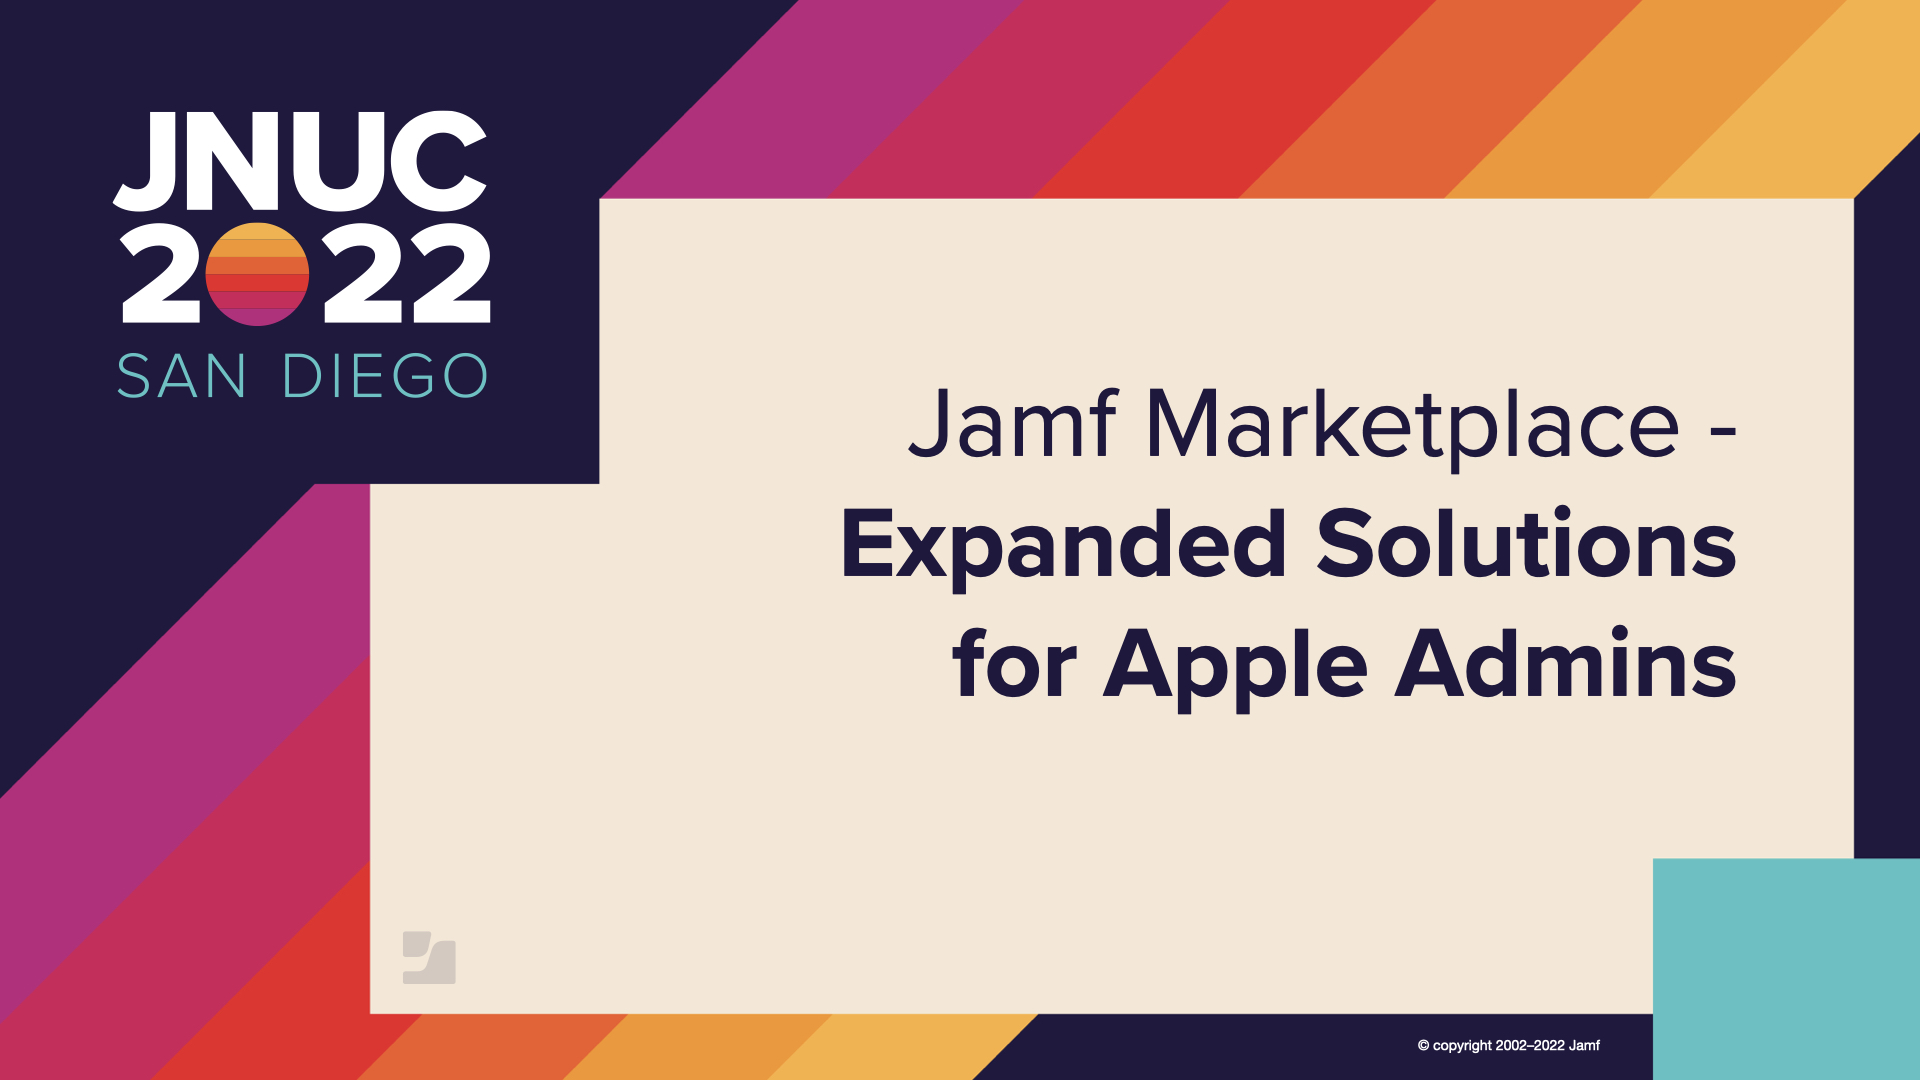 JNUC 2022 session: Jamf Marketplace - Expanded Solutions for Apple Admins